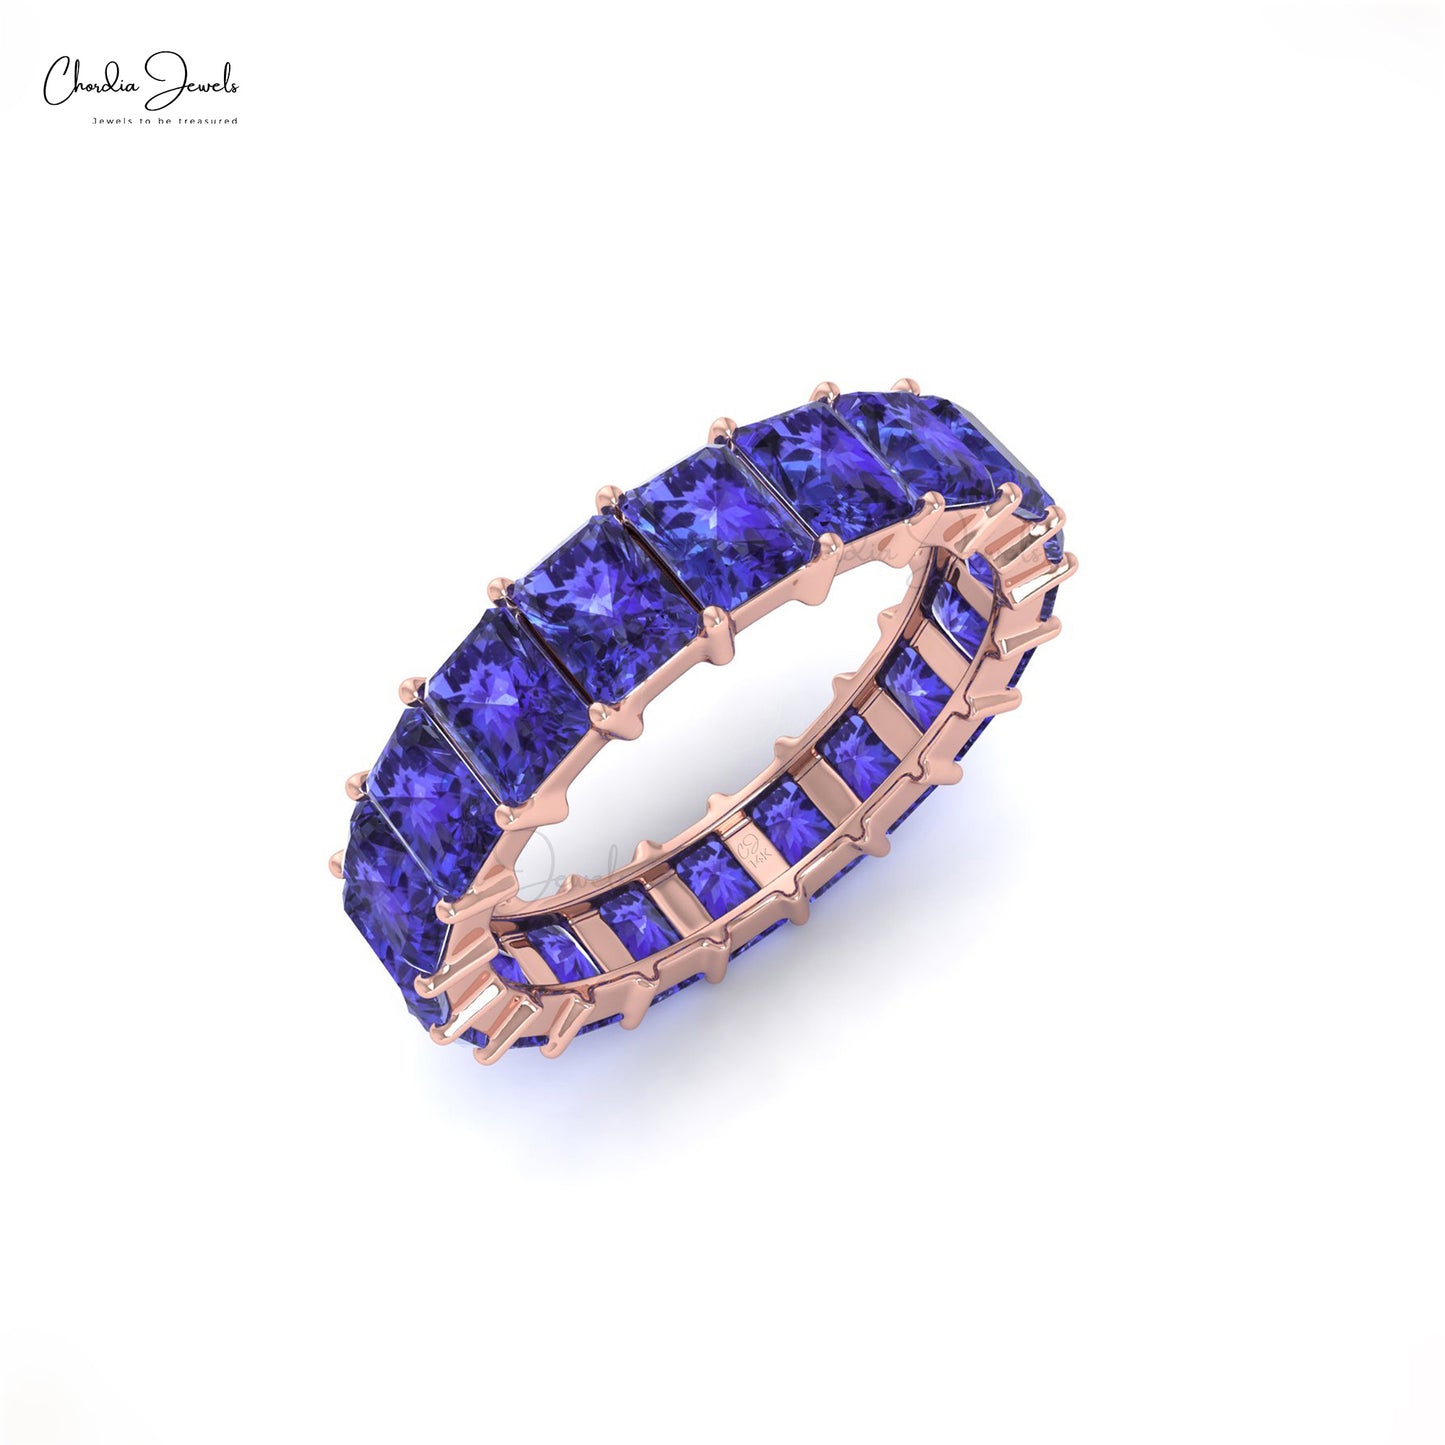 Natural Tanzanite Full Eternity Band in 14k Solid Gold